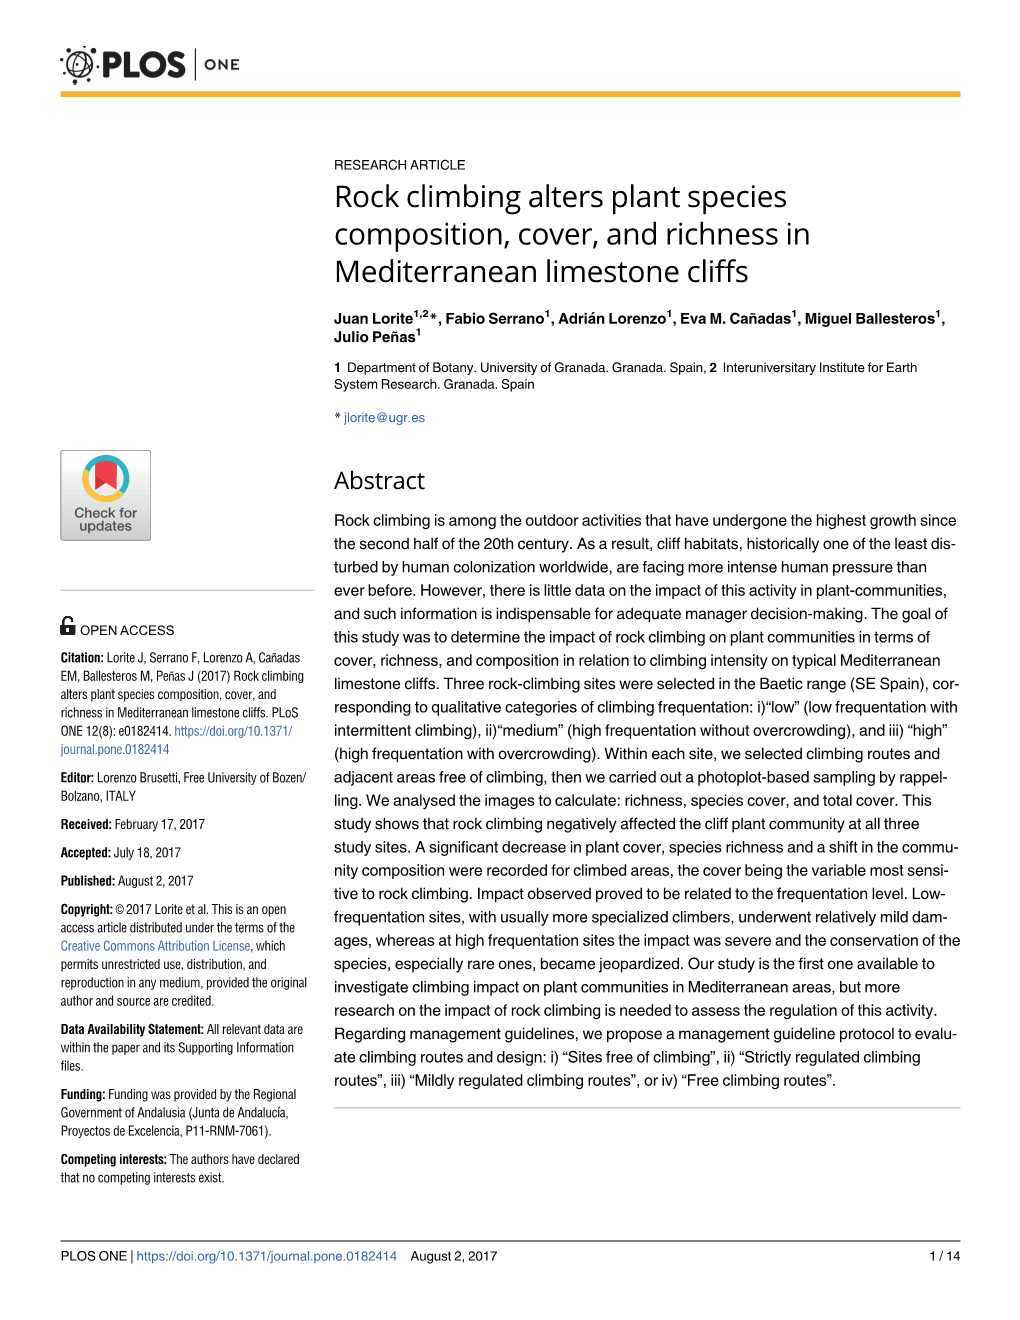 Rock Climbing Alters Plant Species Composition, Cover, and Richness in Mediterranean Limestone Cliffs